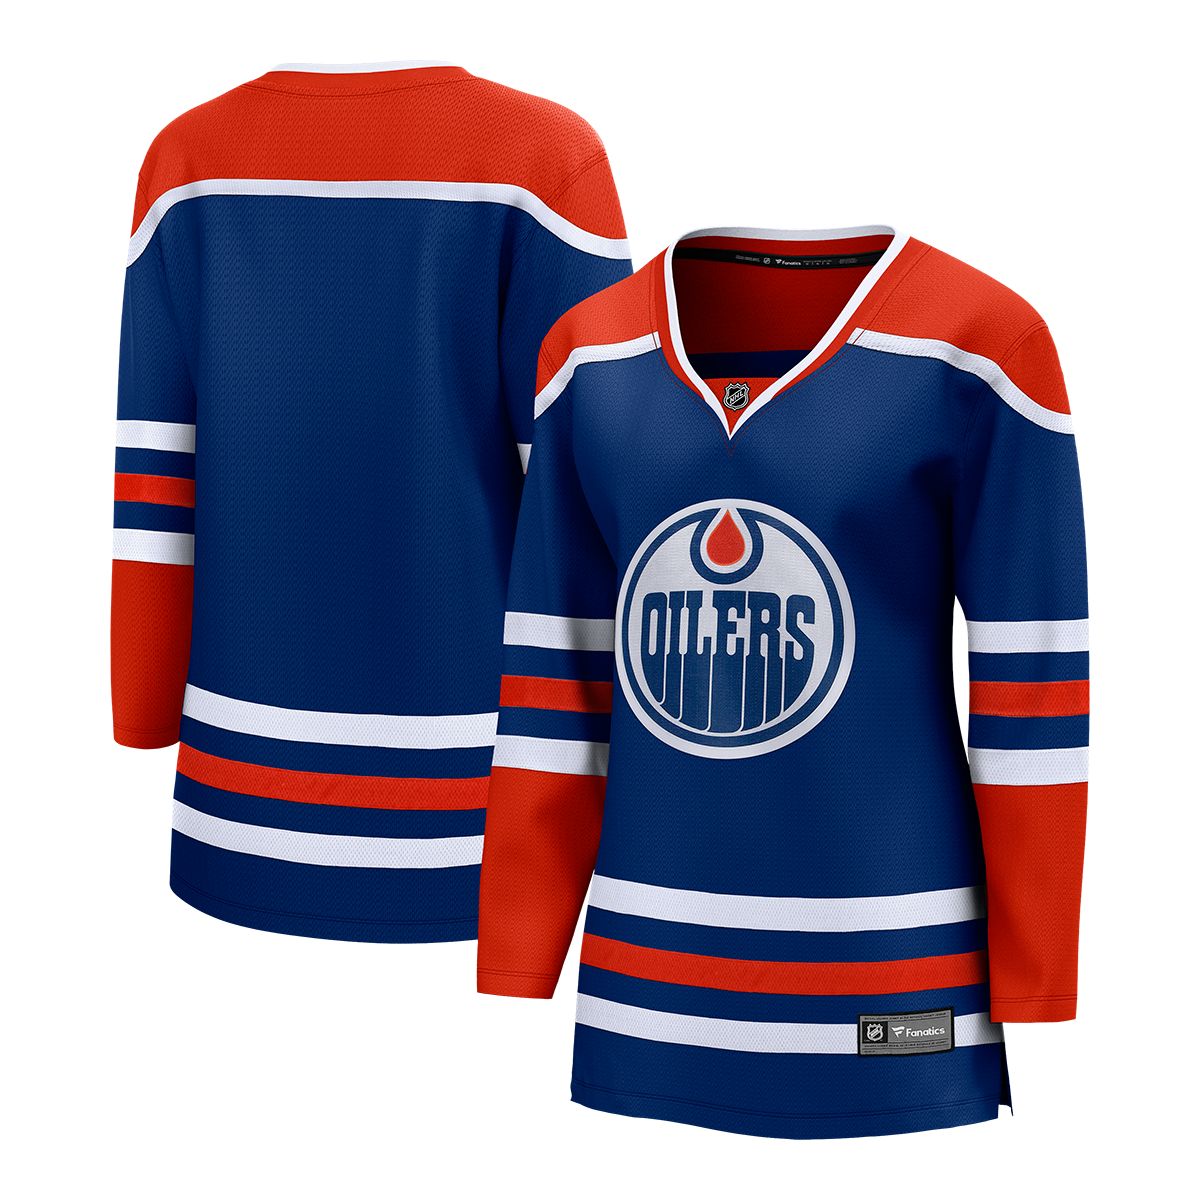 Oilers Shop at Kingsway Mall - Picture of Kingsway Mall, Edmonton